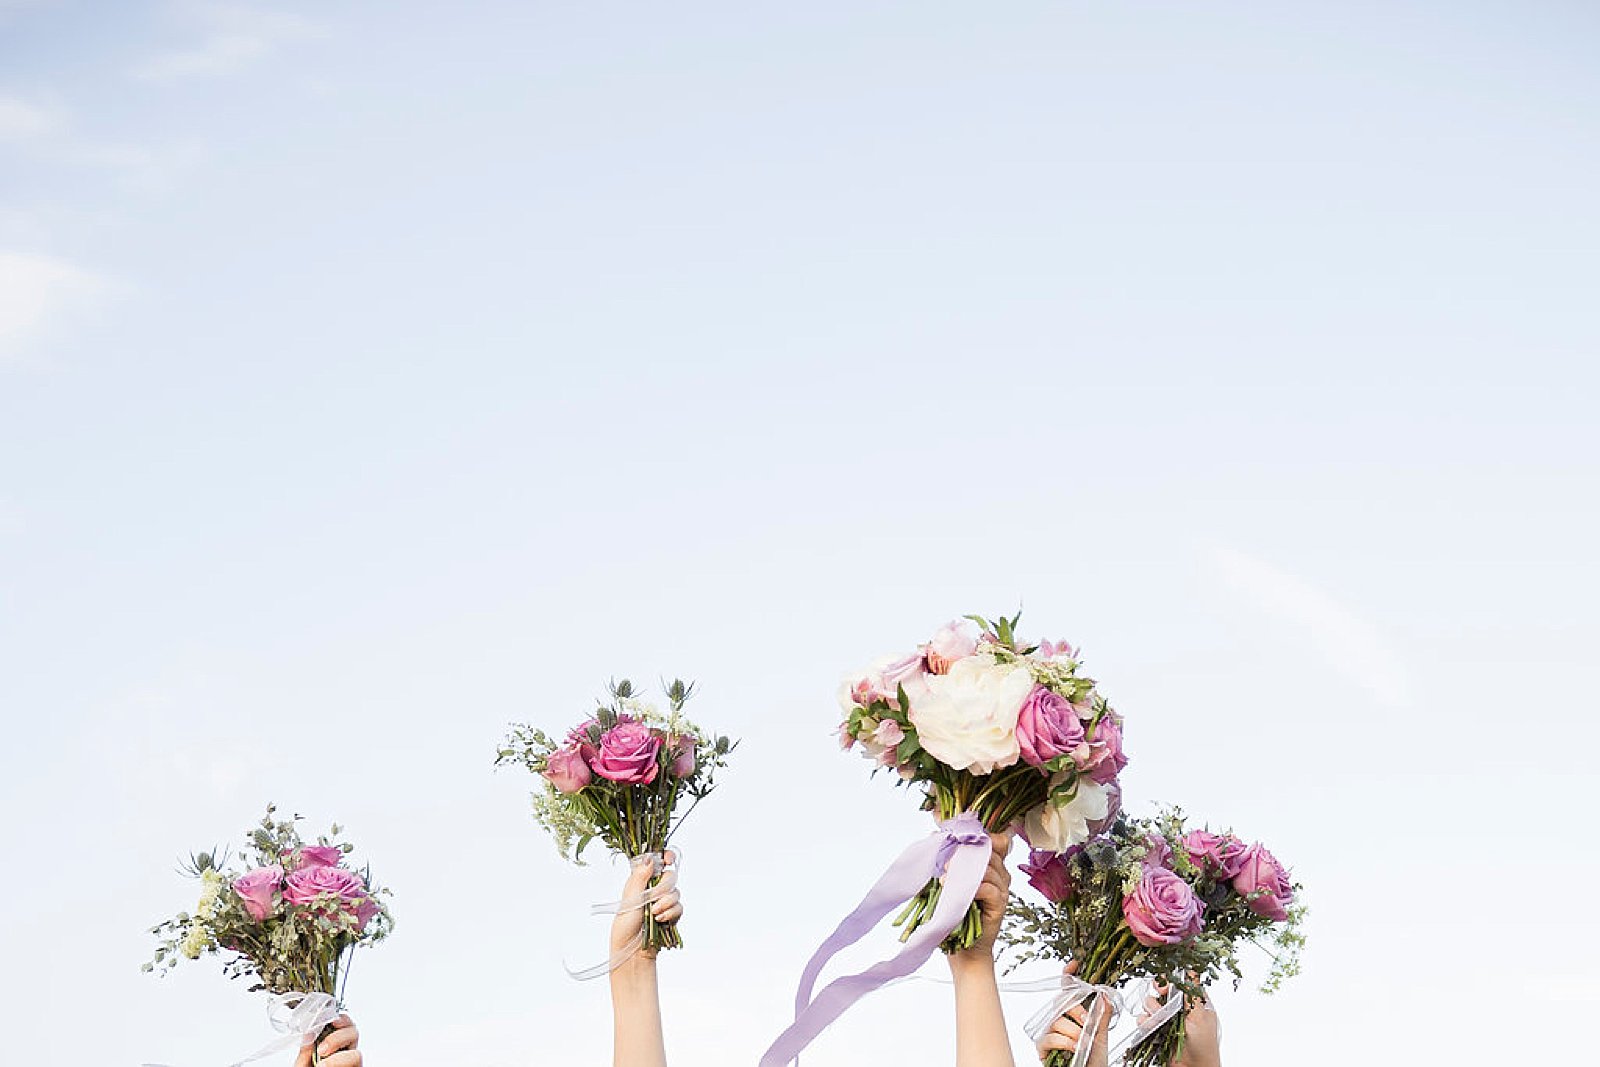 spring wedding bouquet inspiration photographed by Randi Michelle Photography